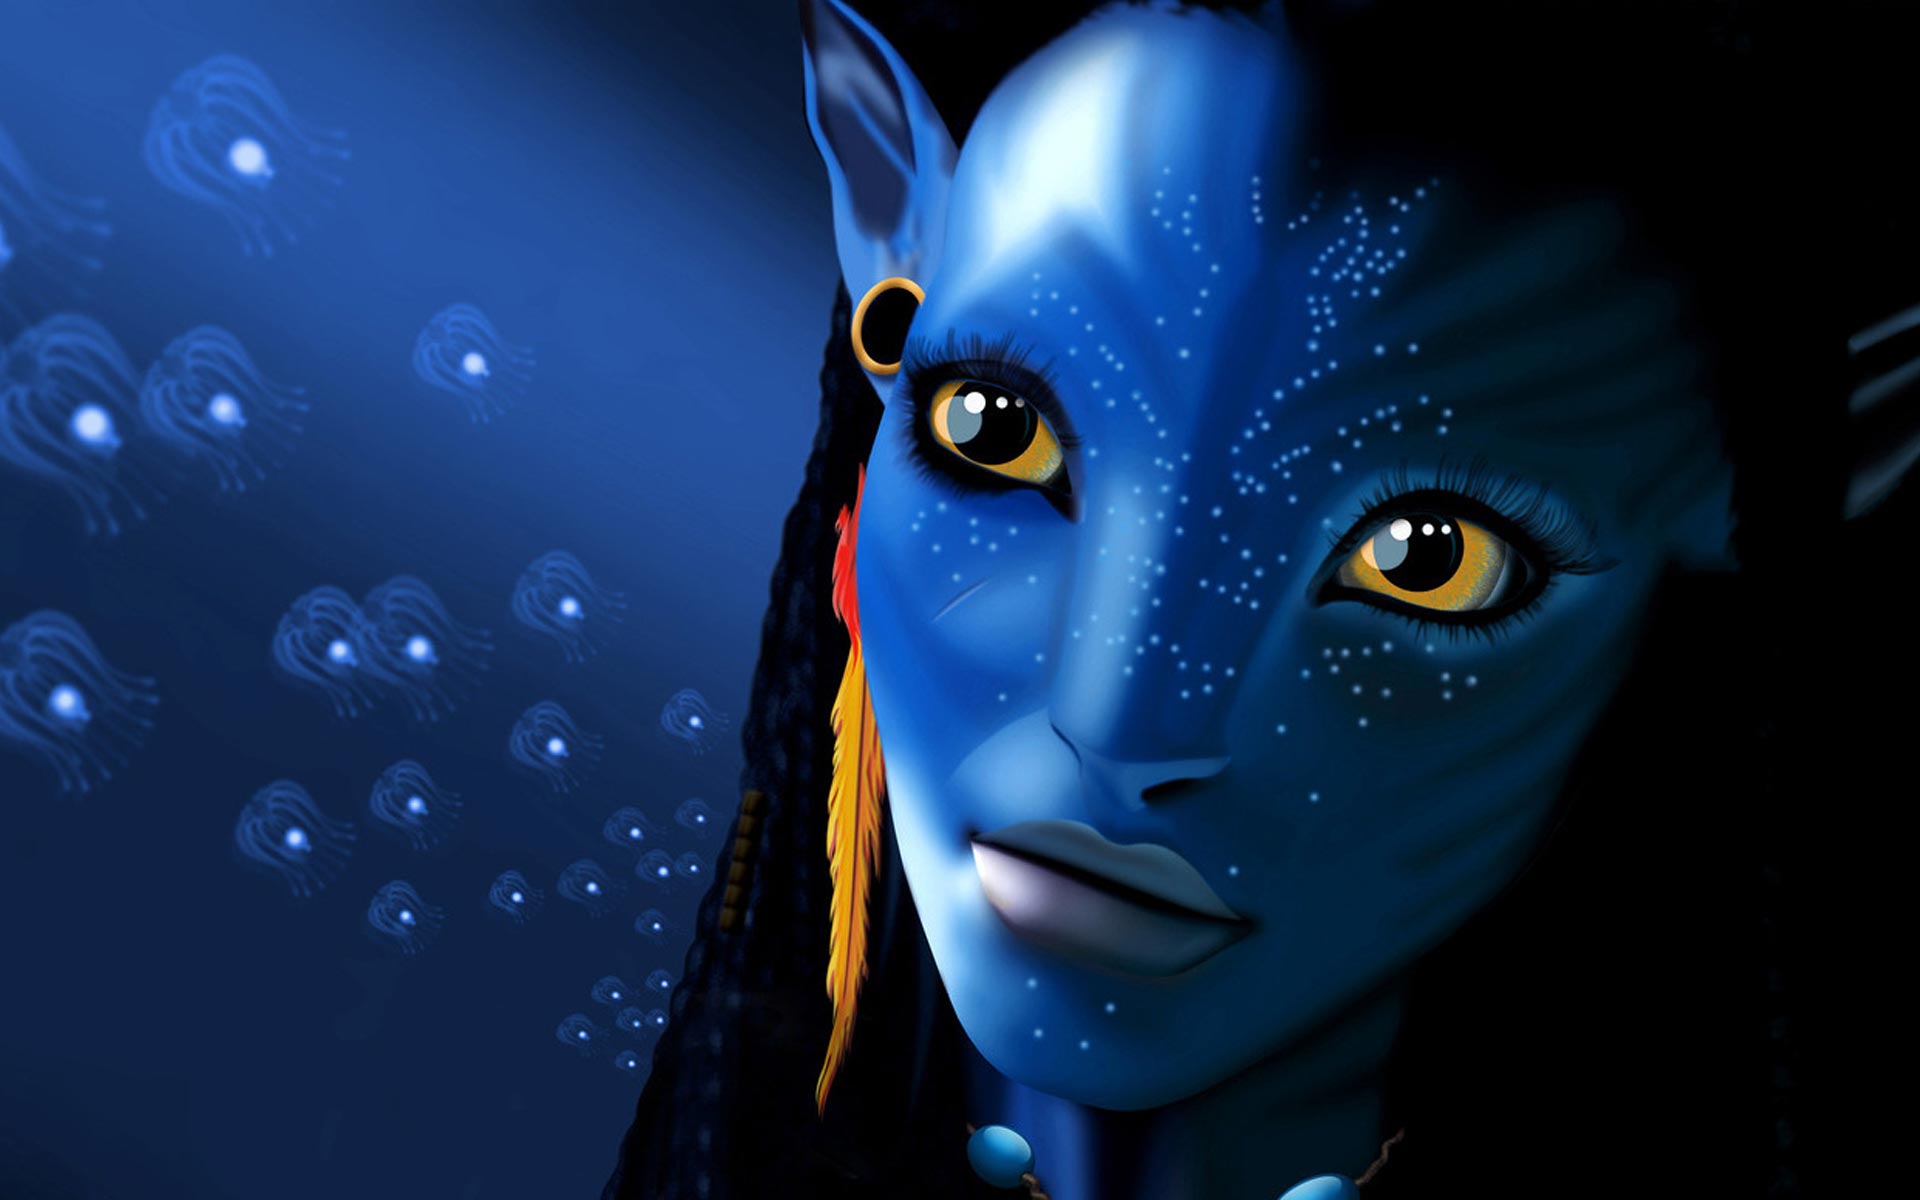 Avatar Game 14041 Hd Wallpapers in Games   Imagescicom